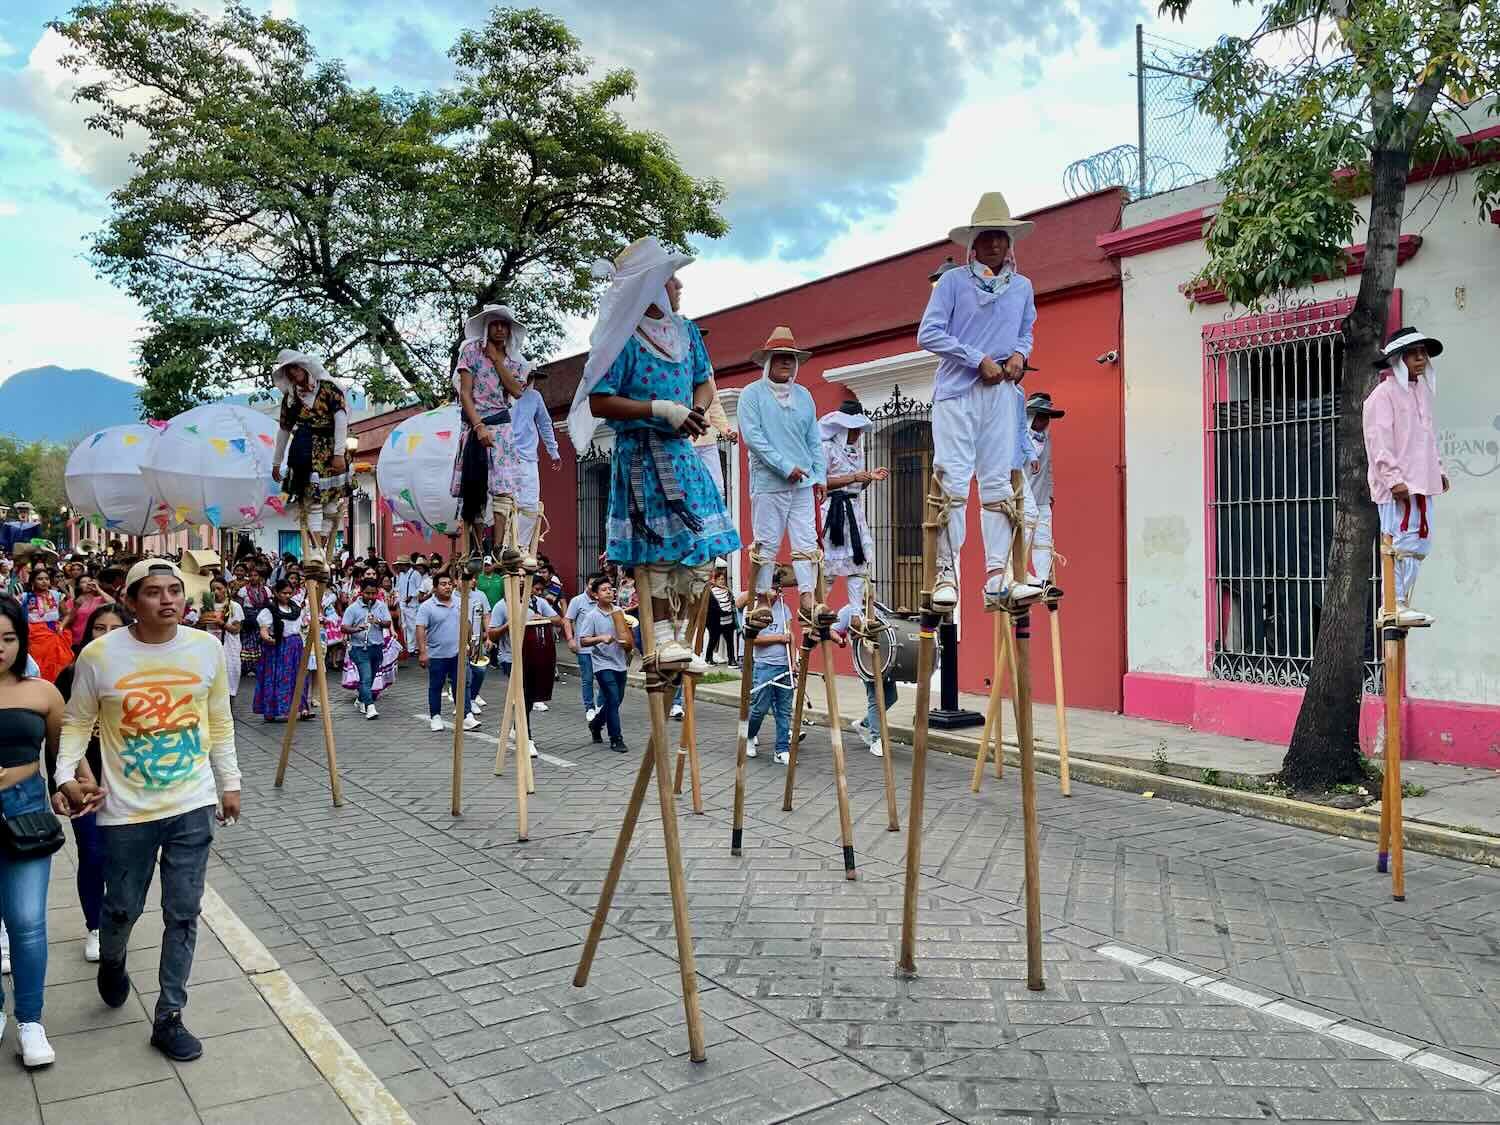 Stilt-walkers had their wooden stilts strapped to their feet with rope